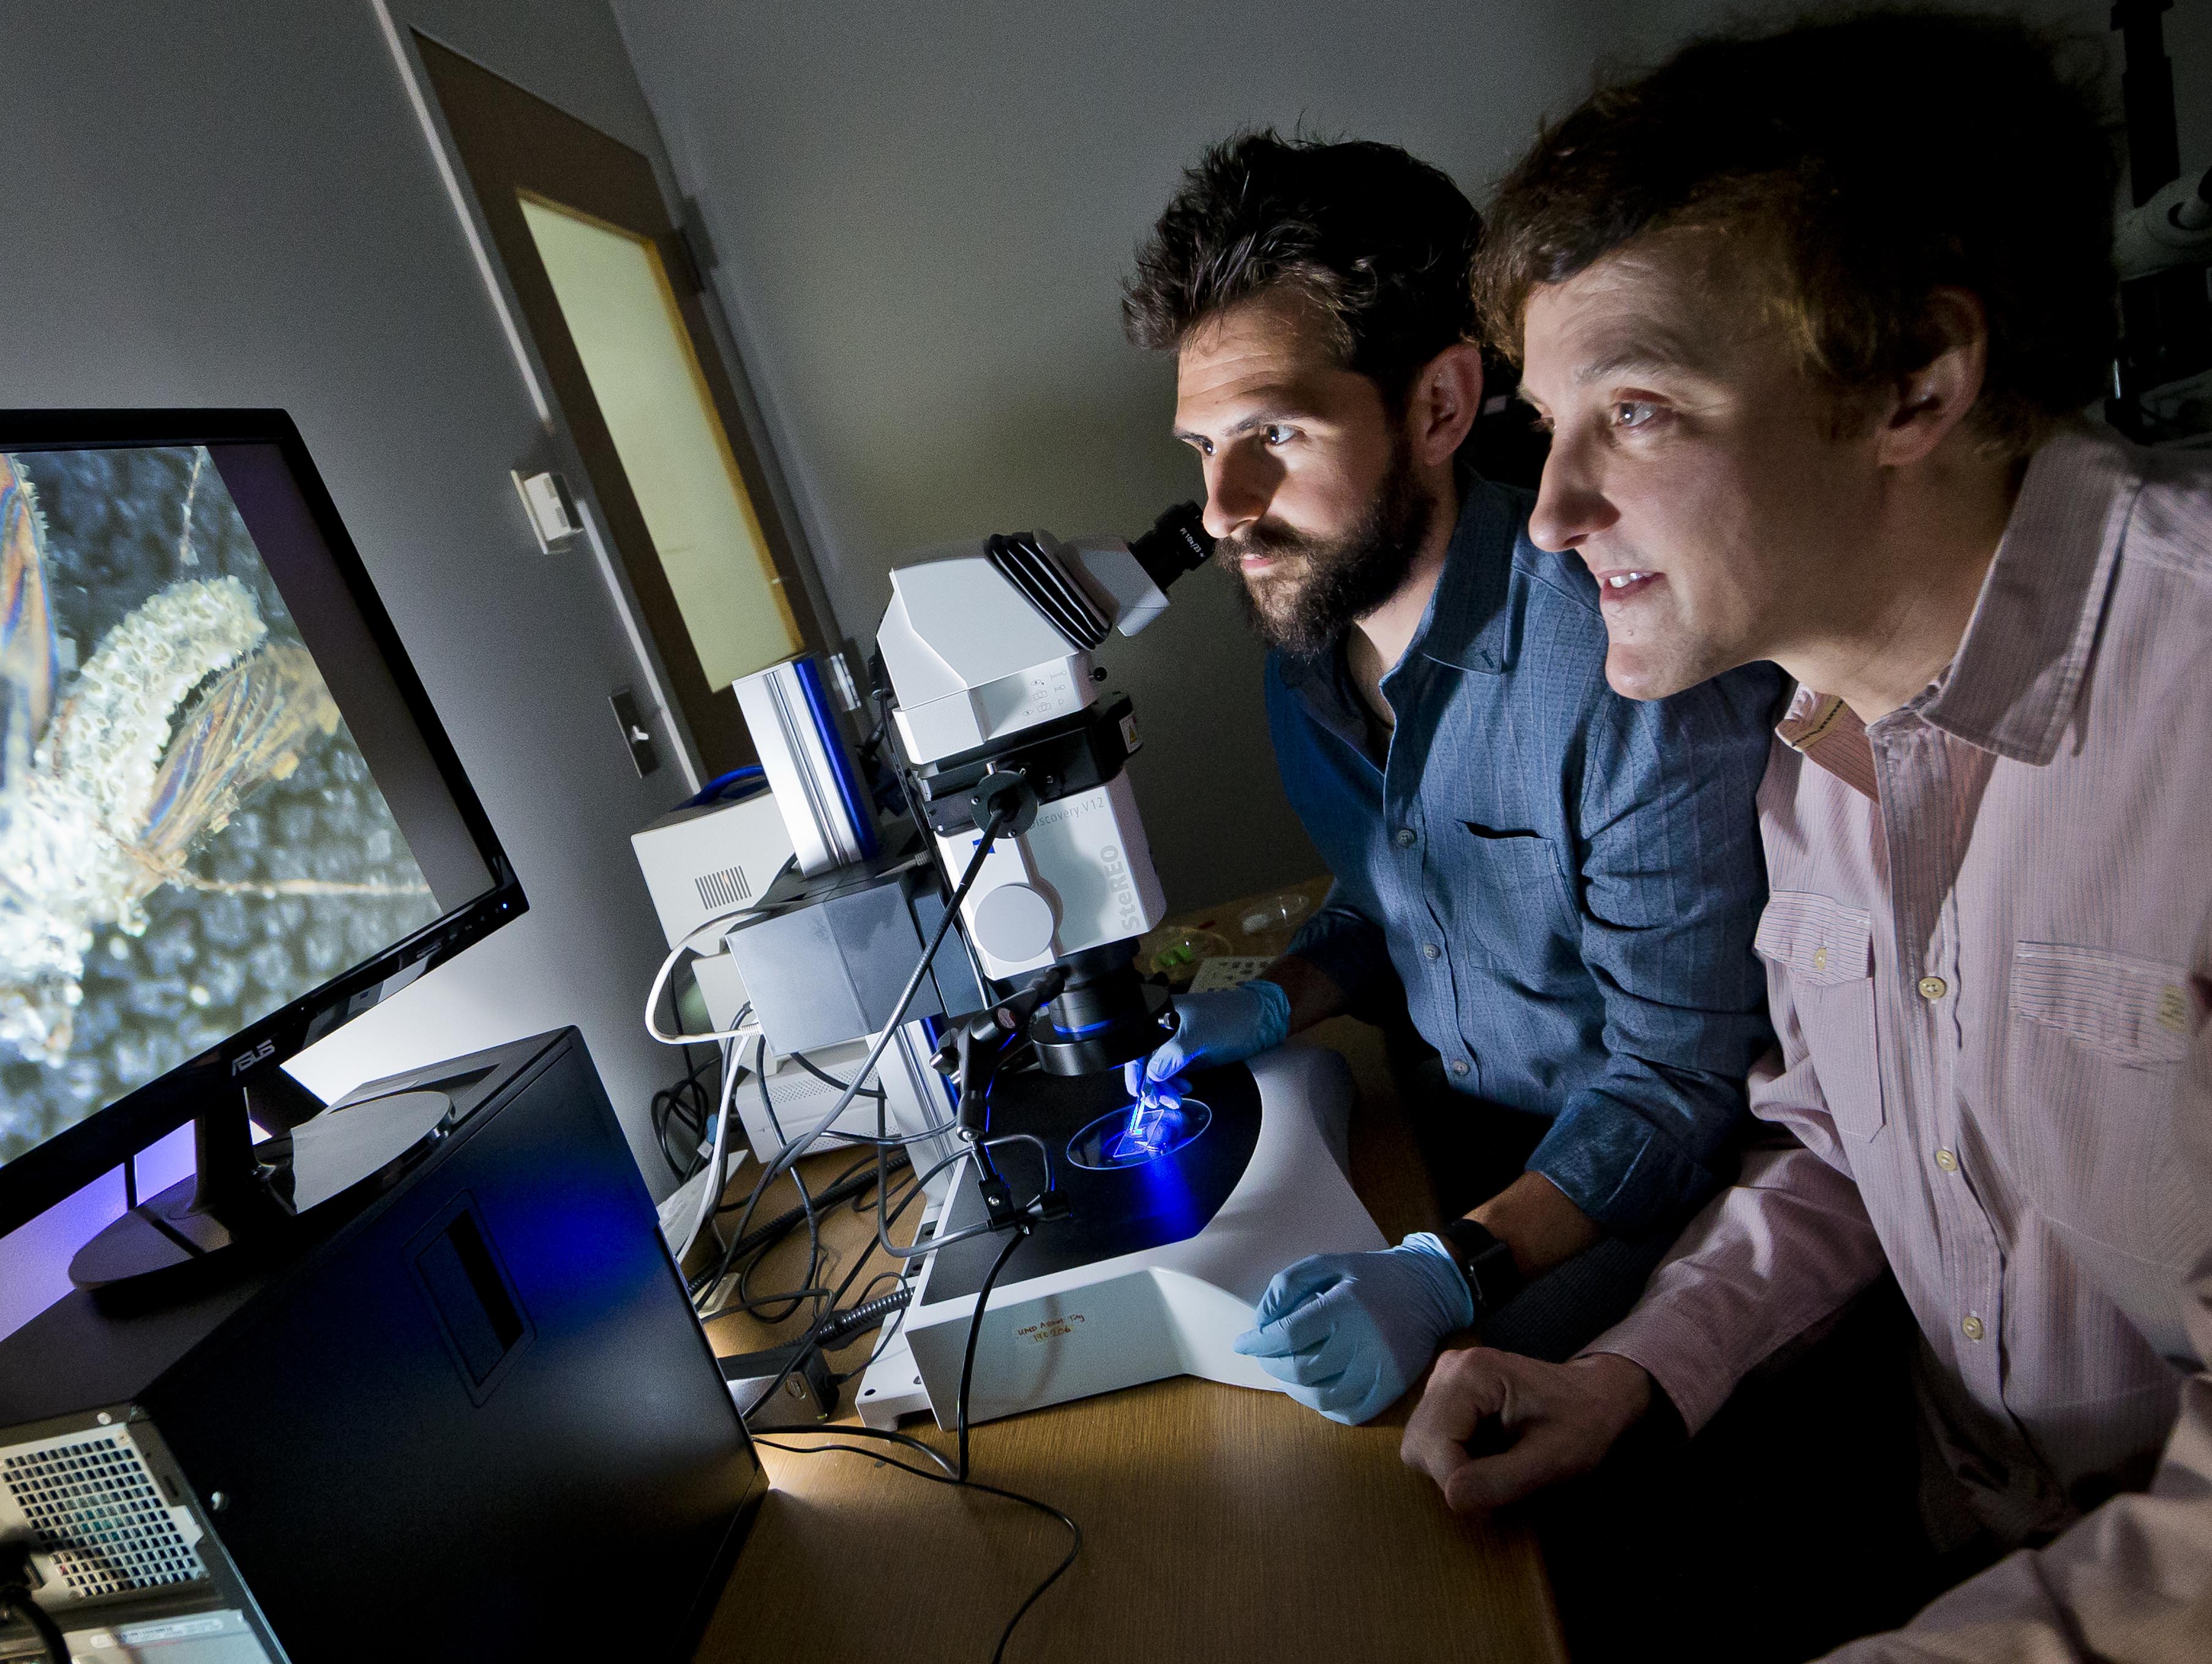 Professor Raymond St. Leger on the right and entomologist Brian Lovett examine a mosquito under the microscope. Their paper in the journal Science describing the development and testing of a transgenic fungus to control malaria mosquitos was awarded the 2019 AAAS Newcomb Cleveland Prize. Photo Credit: John Consloli/University of Maryland. Click image to download hi-res version.
